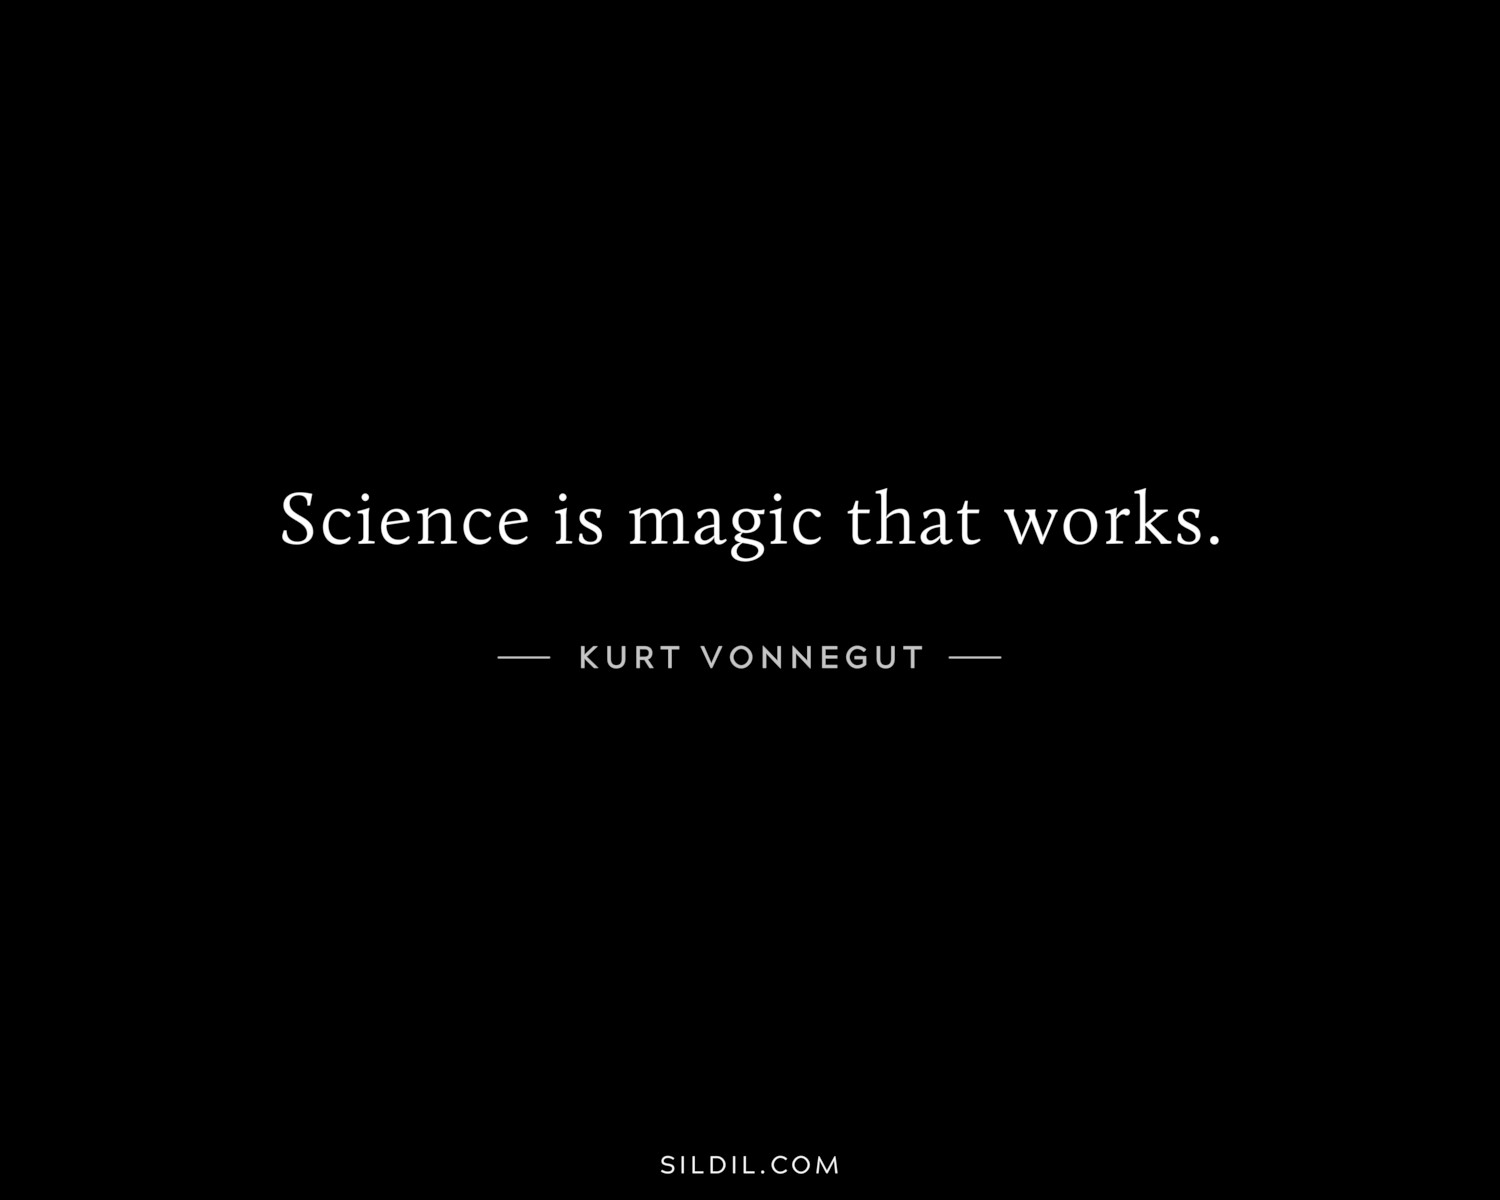 Science is magic that works.